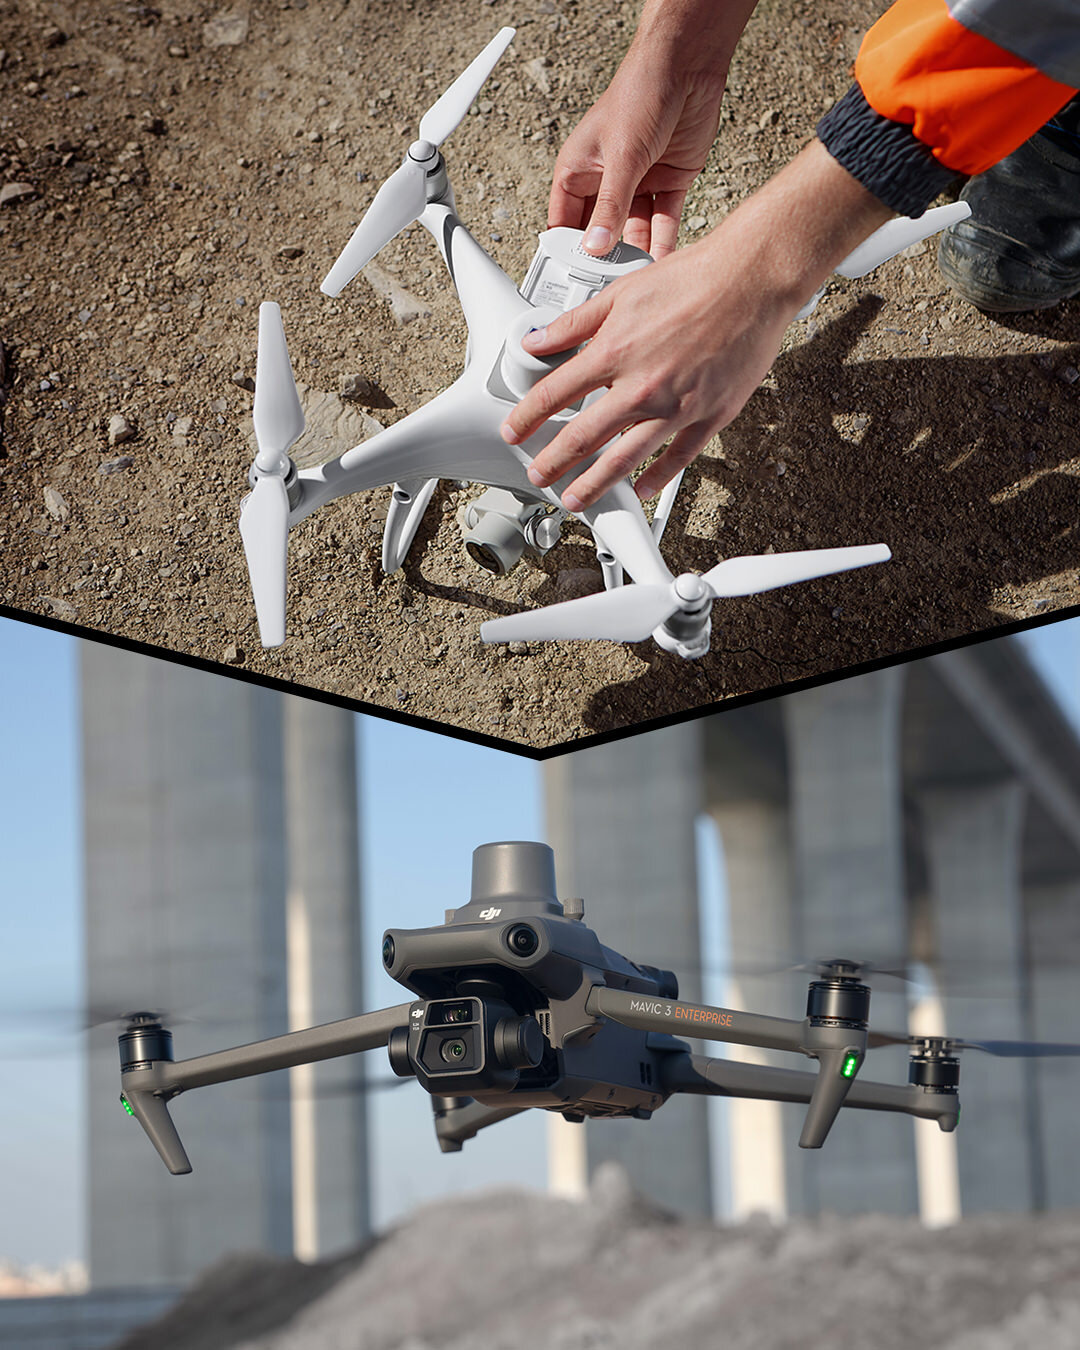 TRADE IN OFFER: For a limited time, trade in your old Phantom 4 drone for instant savings on a new Mavic 3 Enterprise. Check out our BIO link to see how much you can save, and get DJI's most accurate, efficient aerial surveying drone today!
.
.
.
#fe